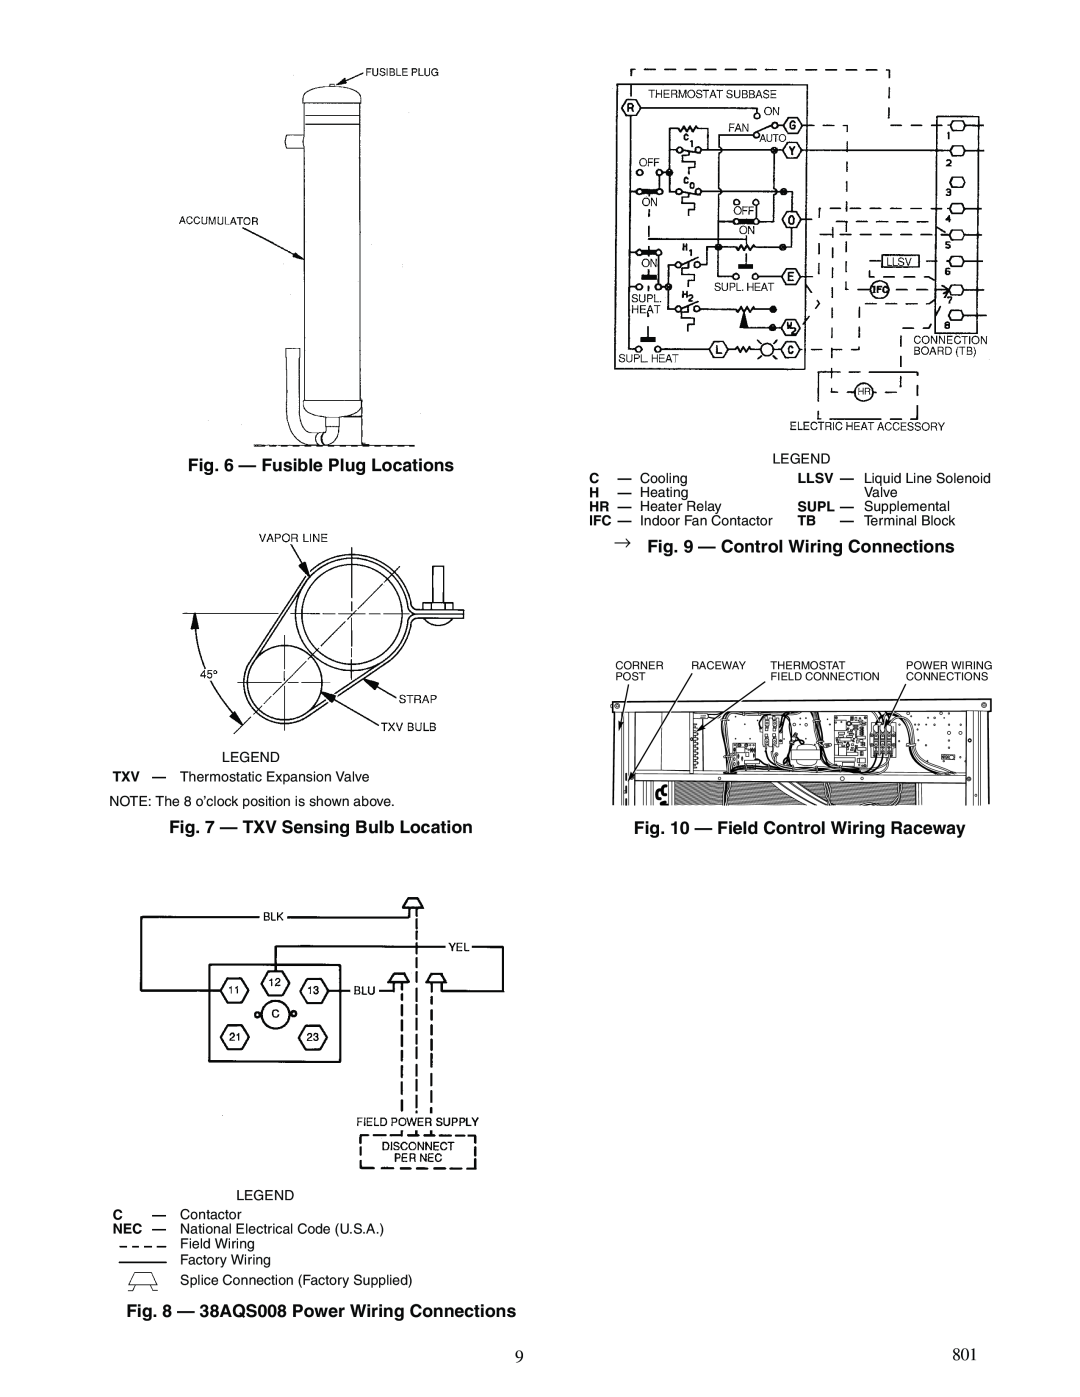 Carrier 38AQS008 specifications Fusible Plug Locations, TXV Sensing Bulb Location, → - Control Wiring Connections 